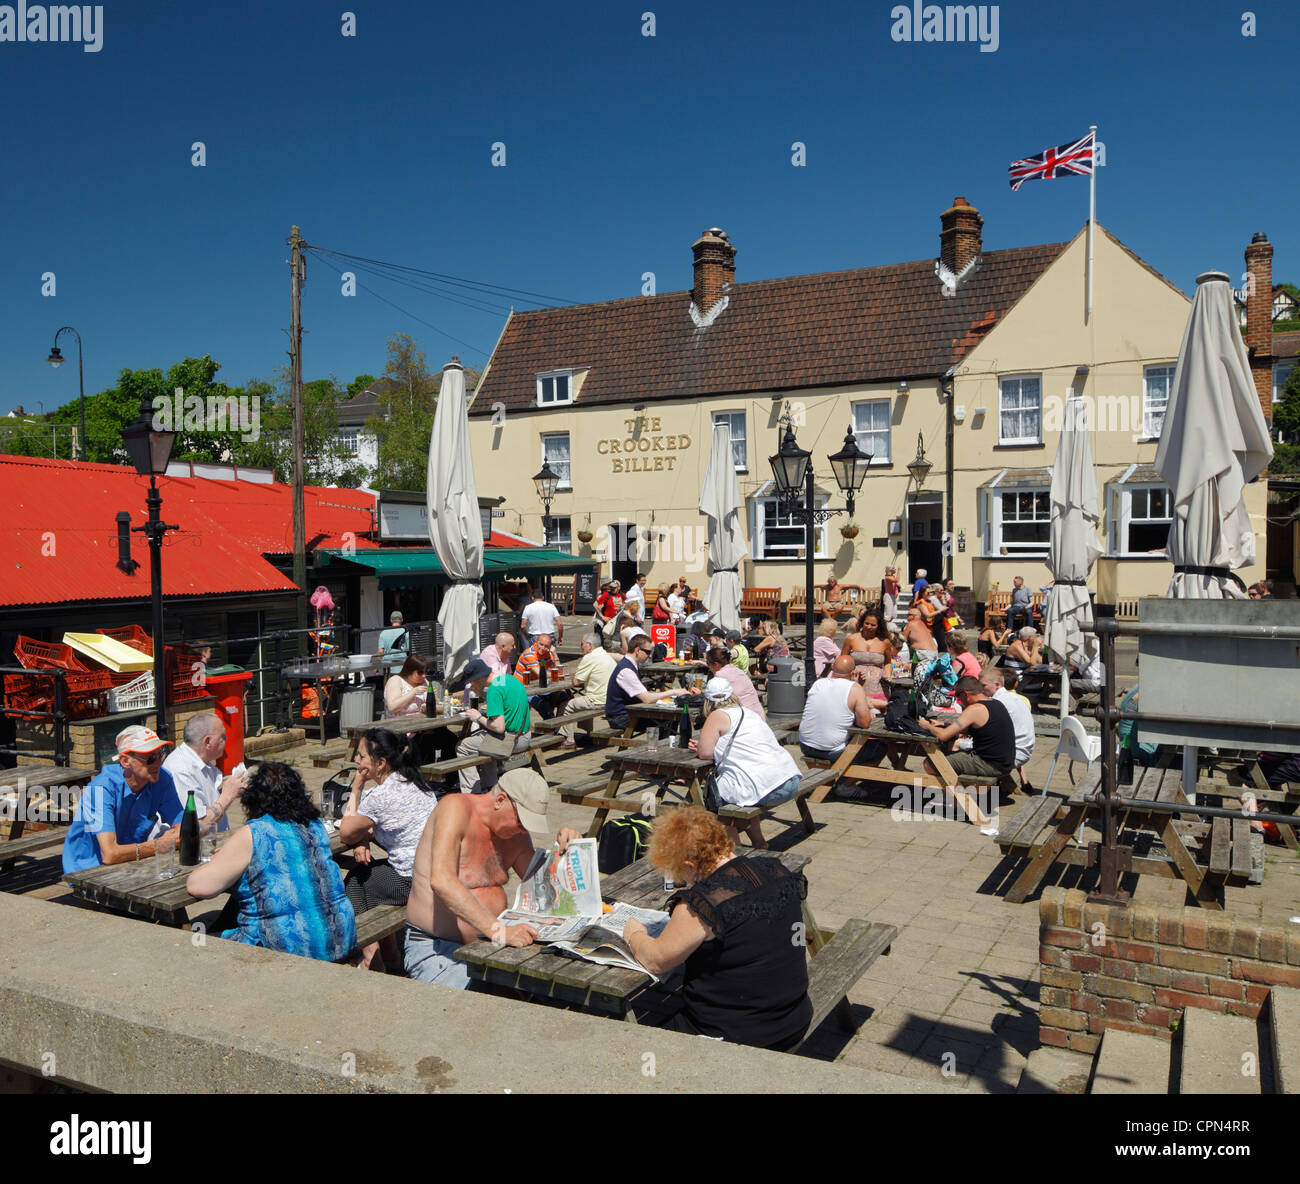 Leigh on Sea, Crooked Billet public house Stock Photo - Alamy